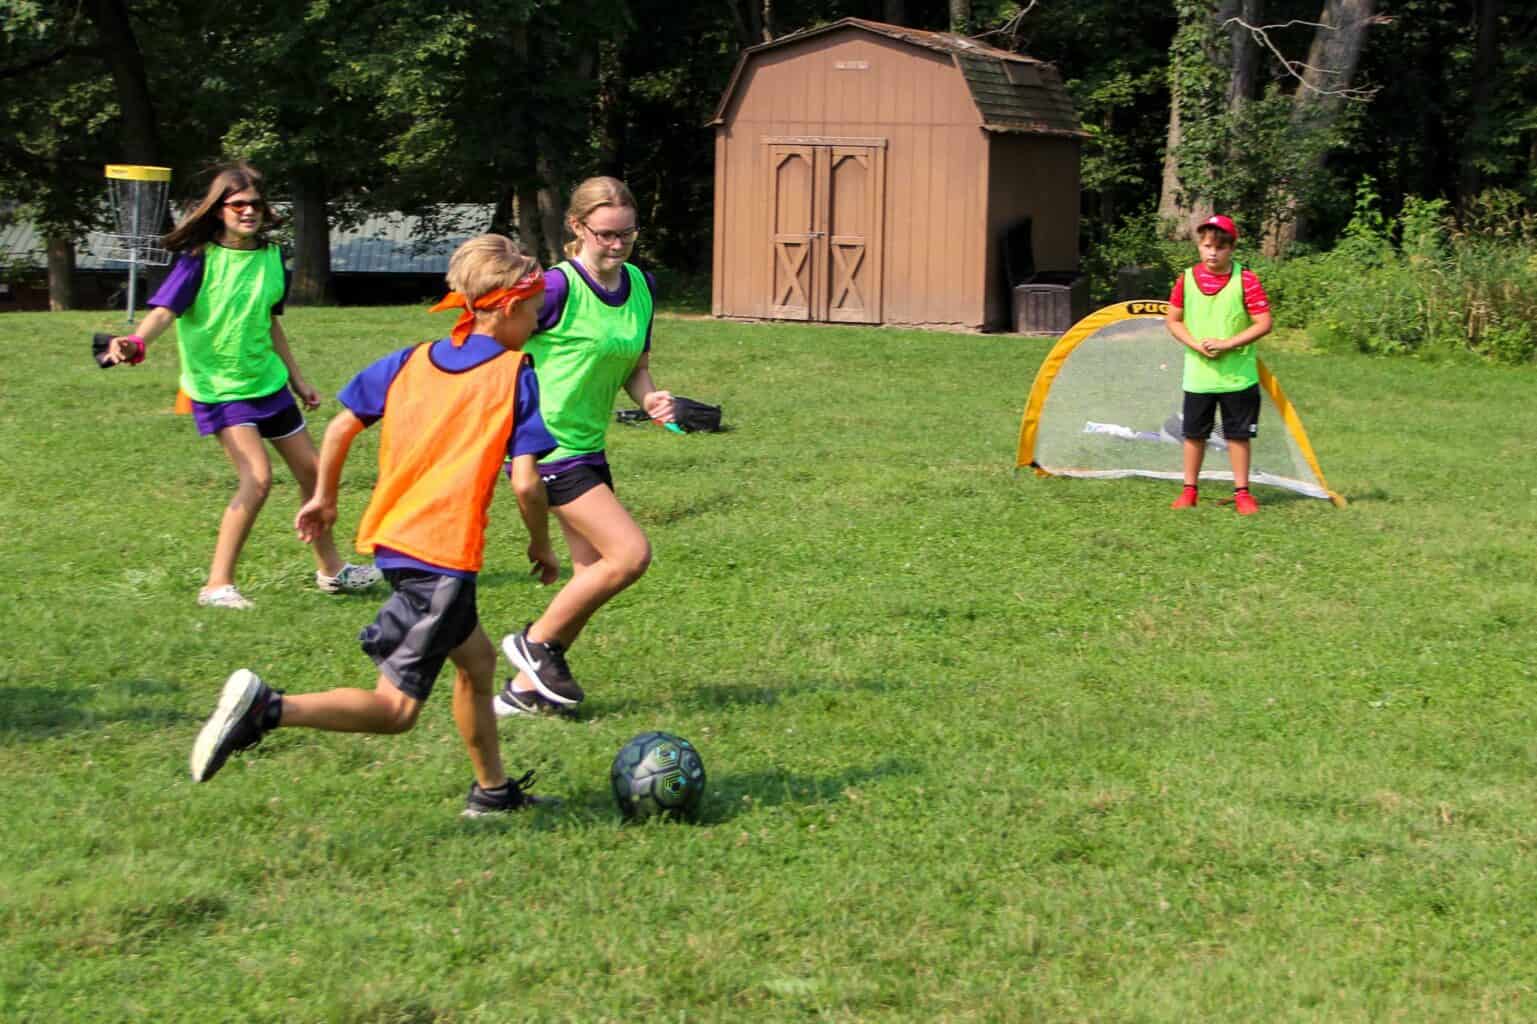 A group of kids at a summer camp in Iowa kicking a soccer ball.